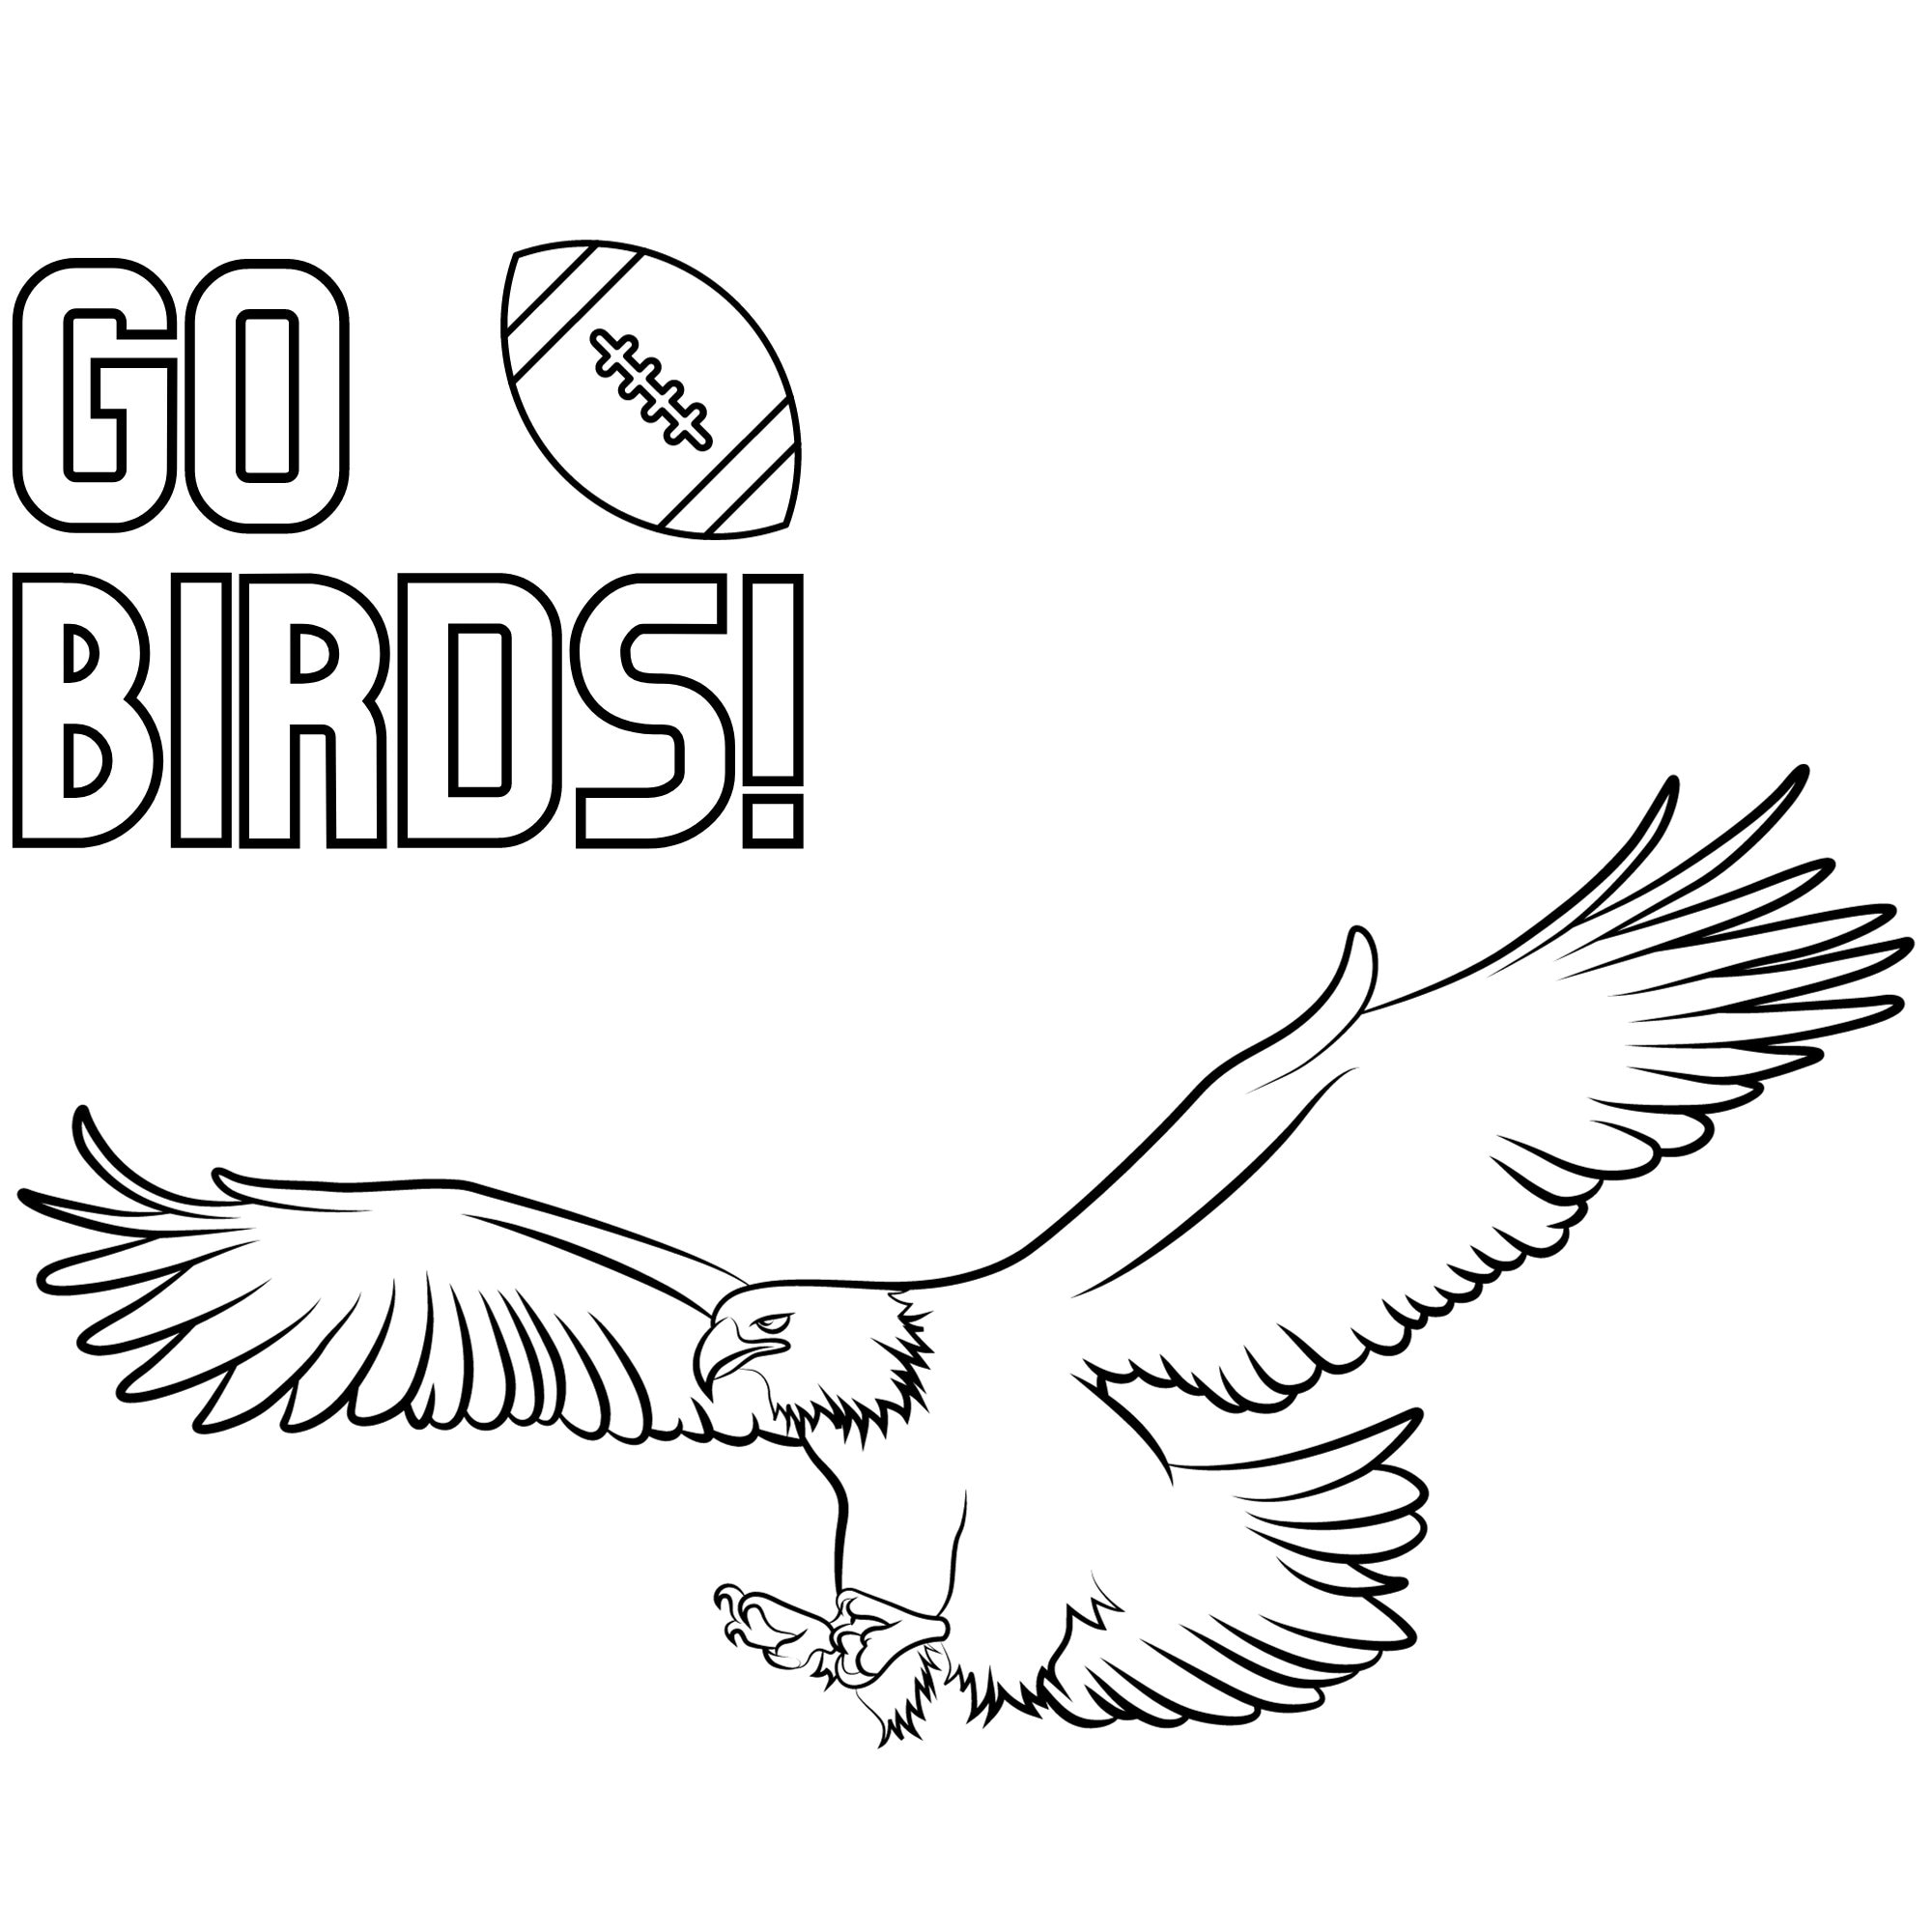 Go birds kids printable coloring page instant download